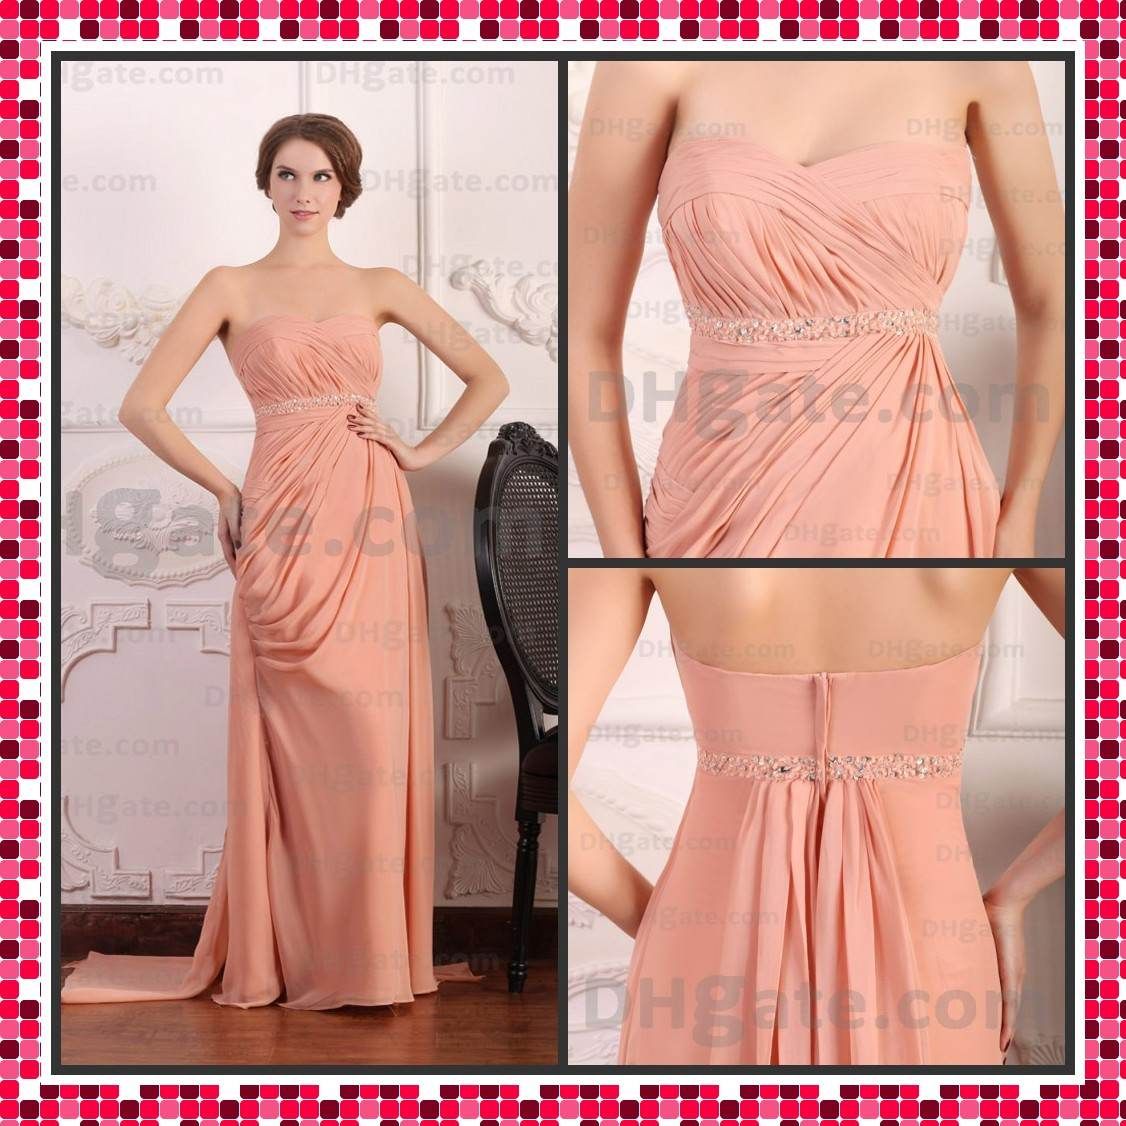 2012 Vintage Celebrity Party Dress A-line Strapless Full Length Beaded ...